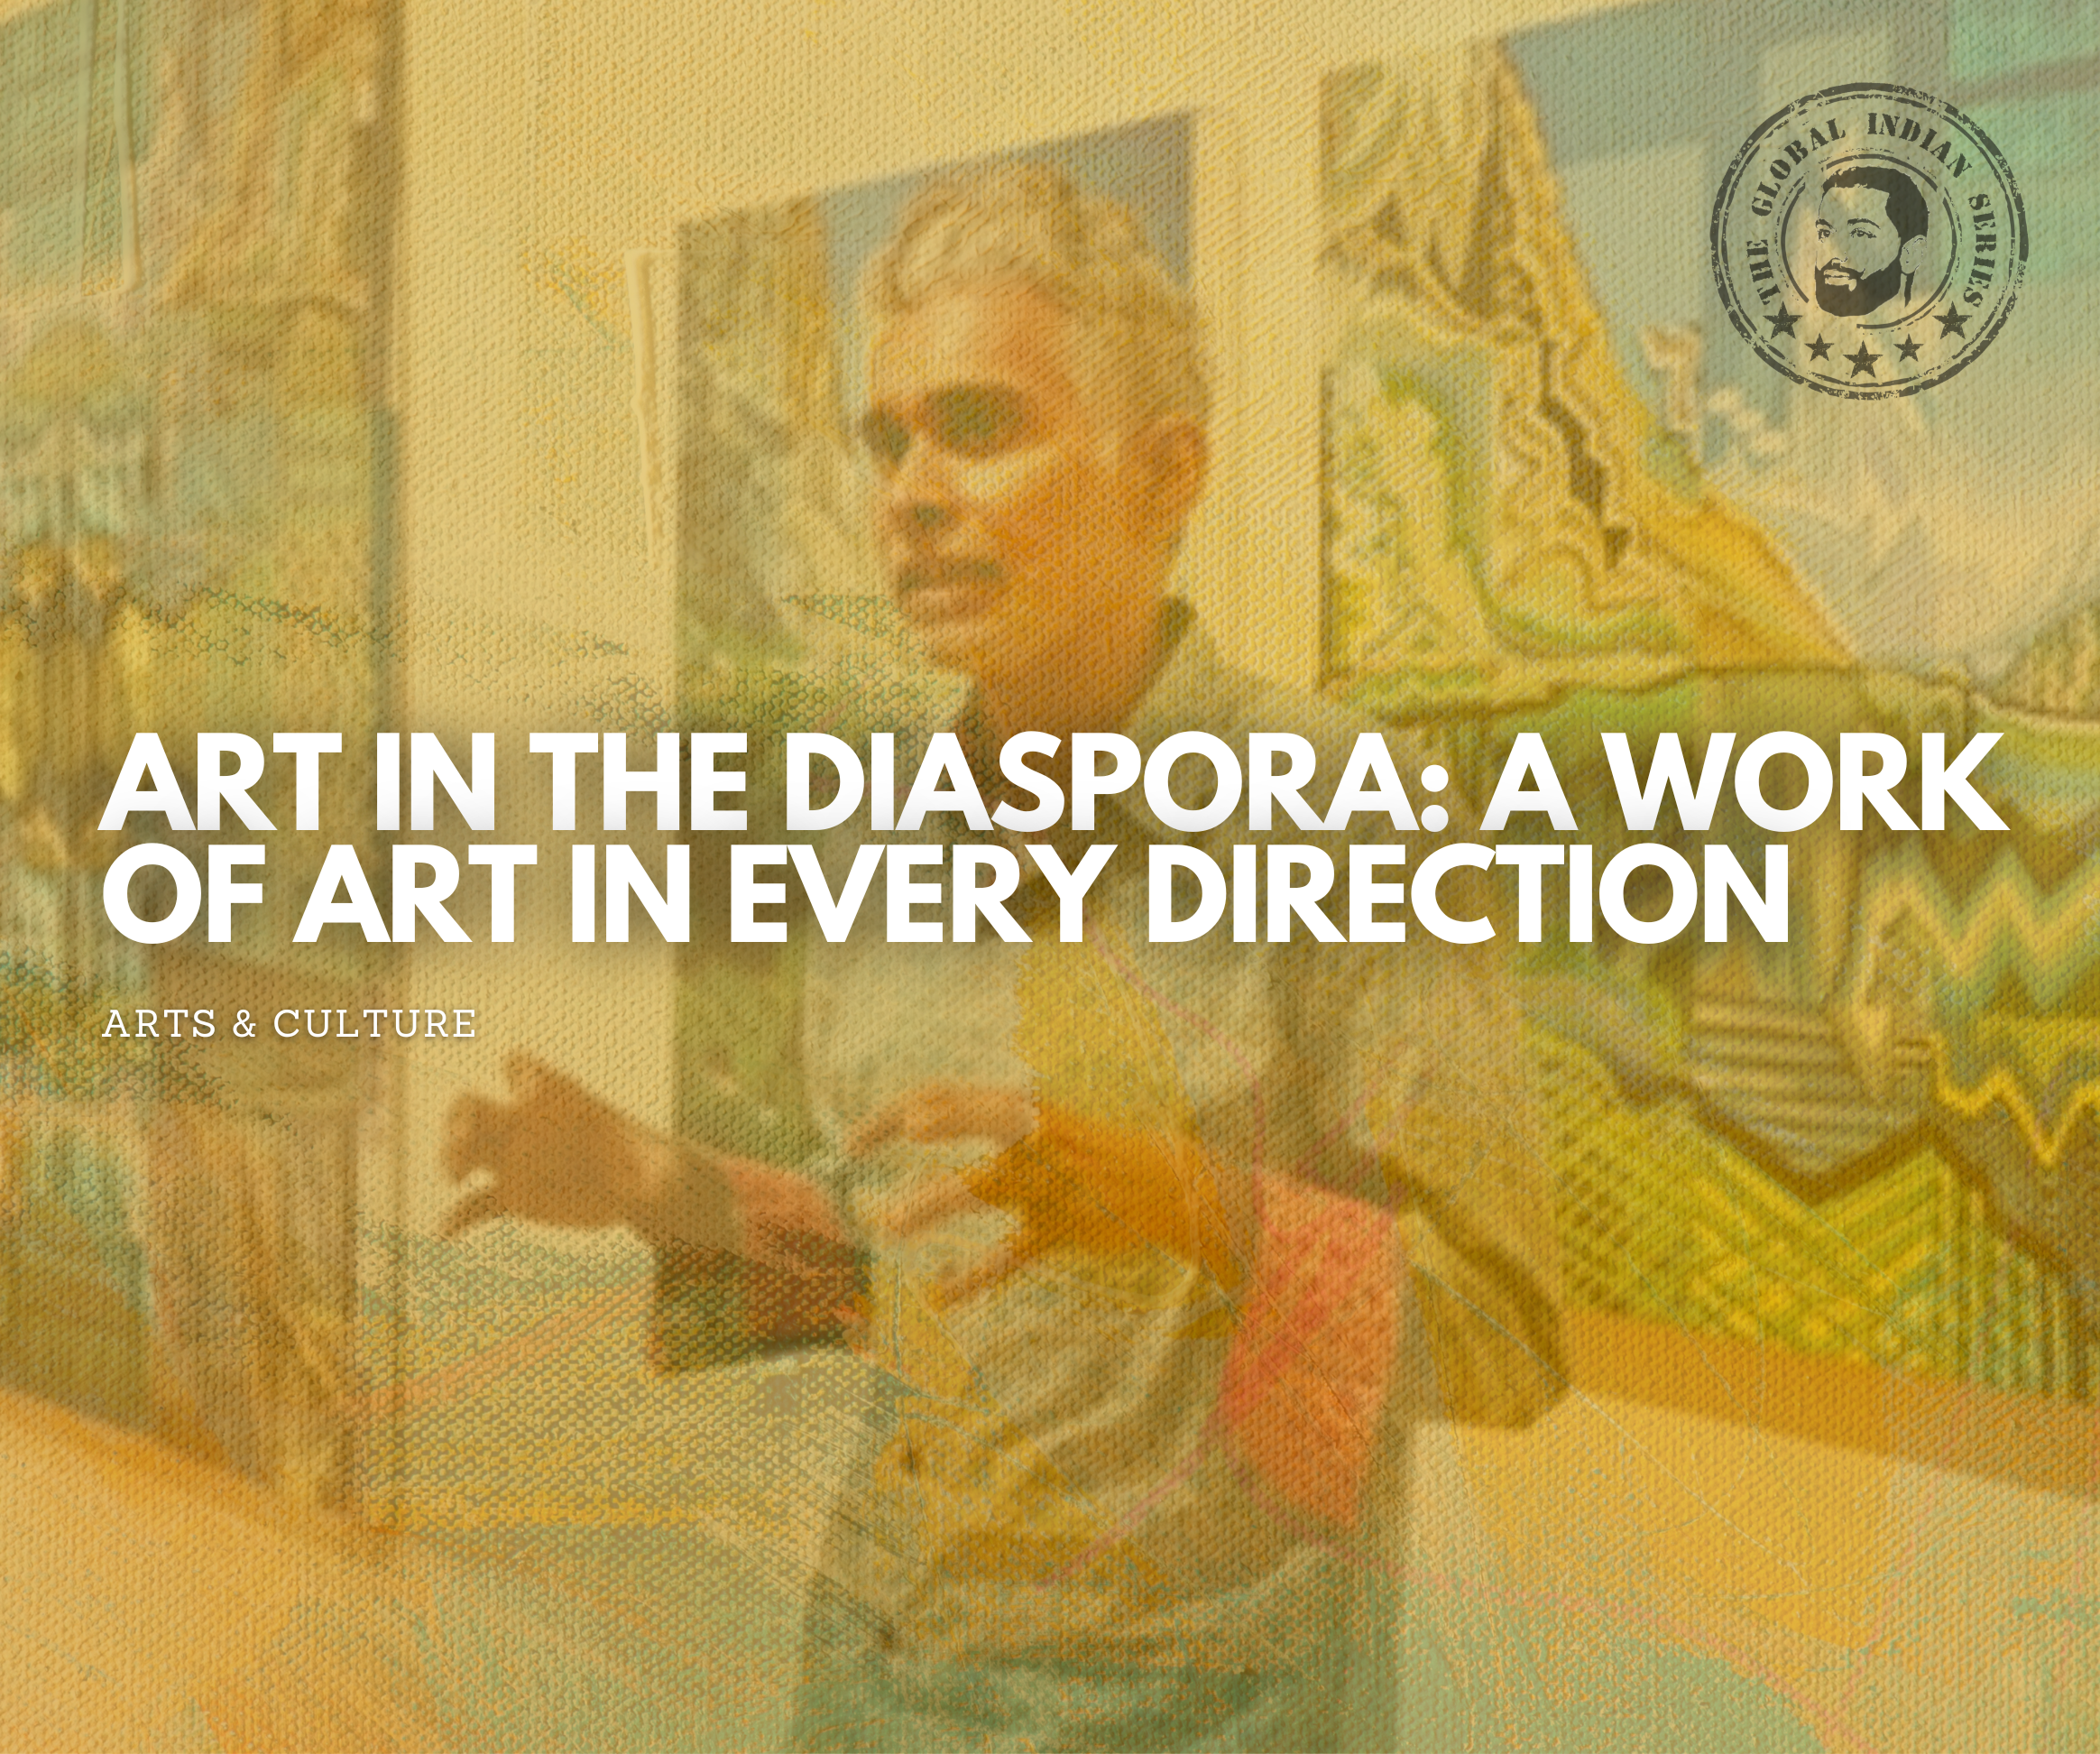 Art in the diaspora: A Work of Art in Every Direction, art by artists revisualizing diaspora bringing life to arts and culture.